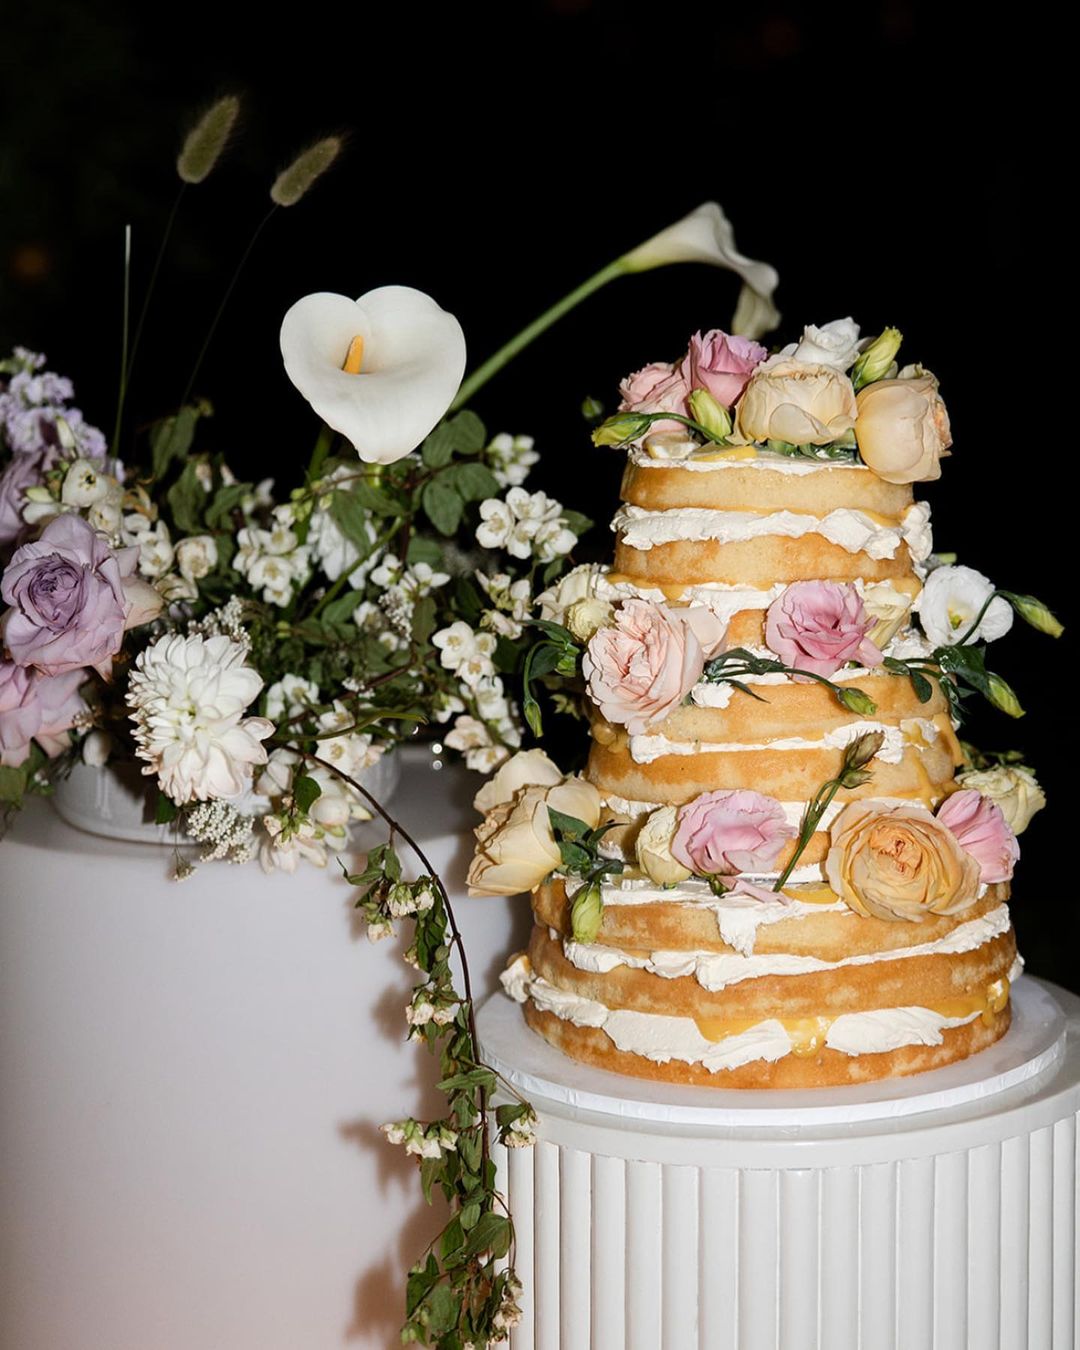 What are the Best Wedding Cakes? - Adelaide Wedding - Wedding SA